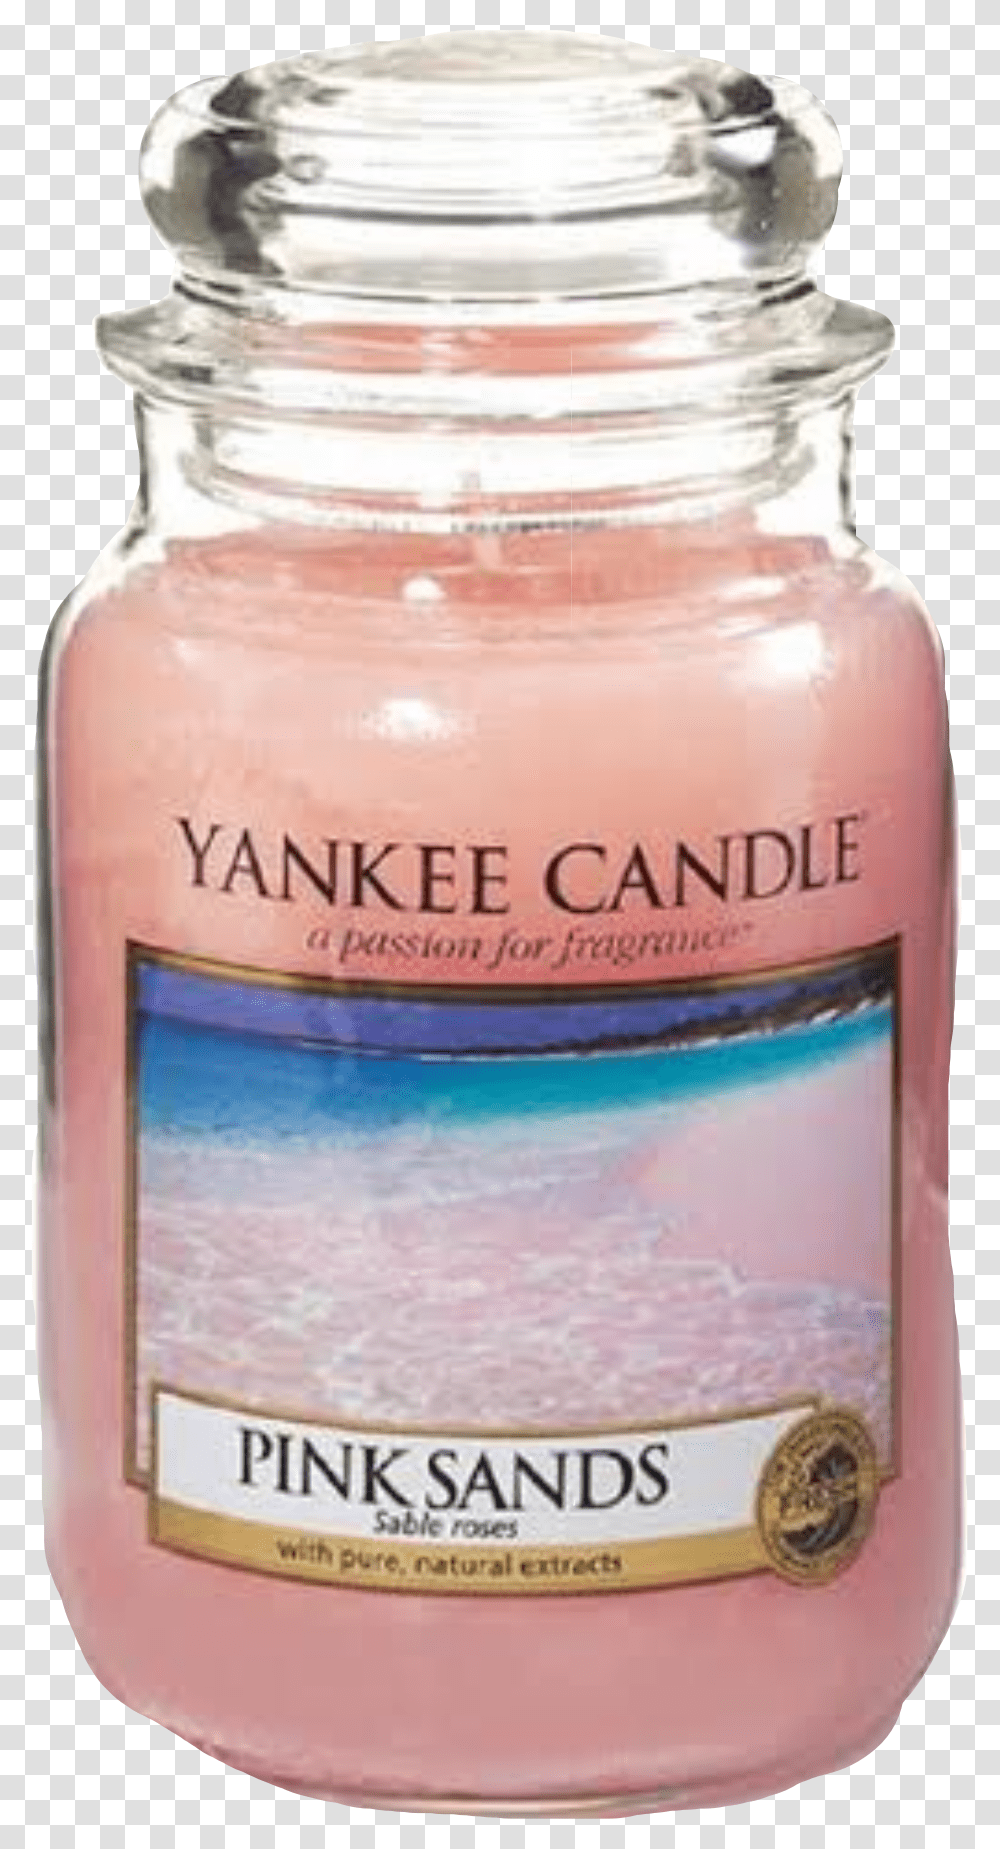 Yankee Candle Candles Yankeecandles Aesthetic Pink Sands Large Yankee Candle, Cosmetics, Wedding Cake, Dessert, Food Transparent Png